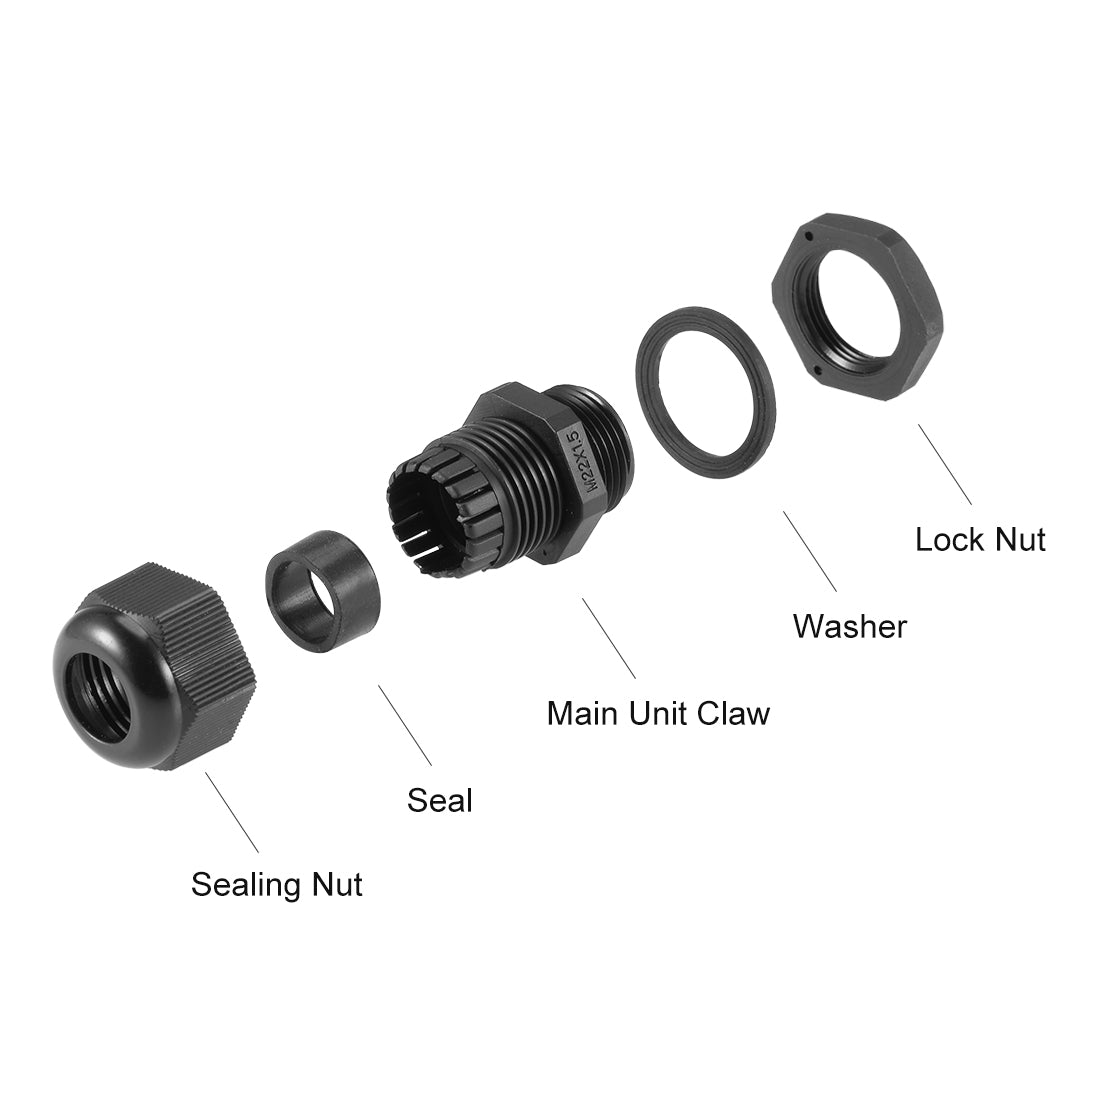 uxcell Uxcell M22x1.5 Cable Gland 7mm-12mm Wire Hole Waterproof Nylon Joint Adjustable Locknut with Washer Black 10pcs